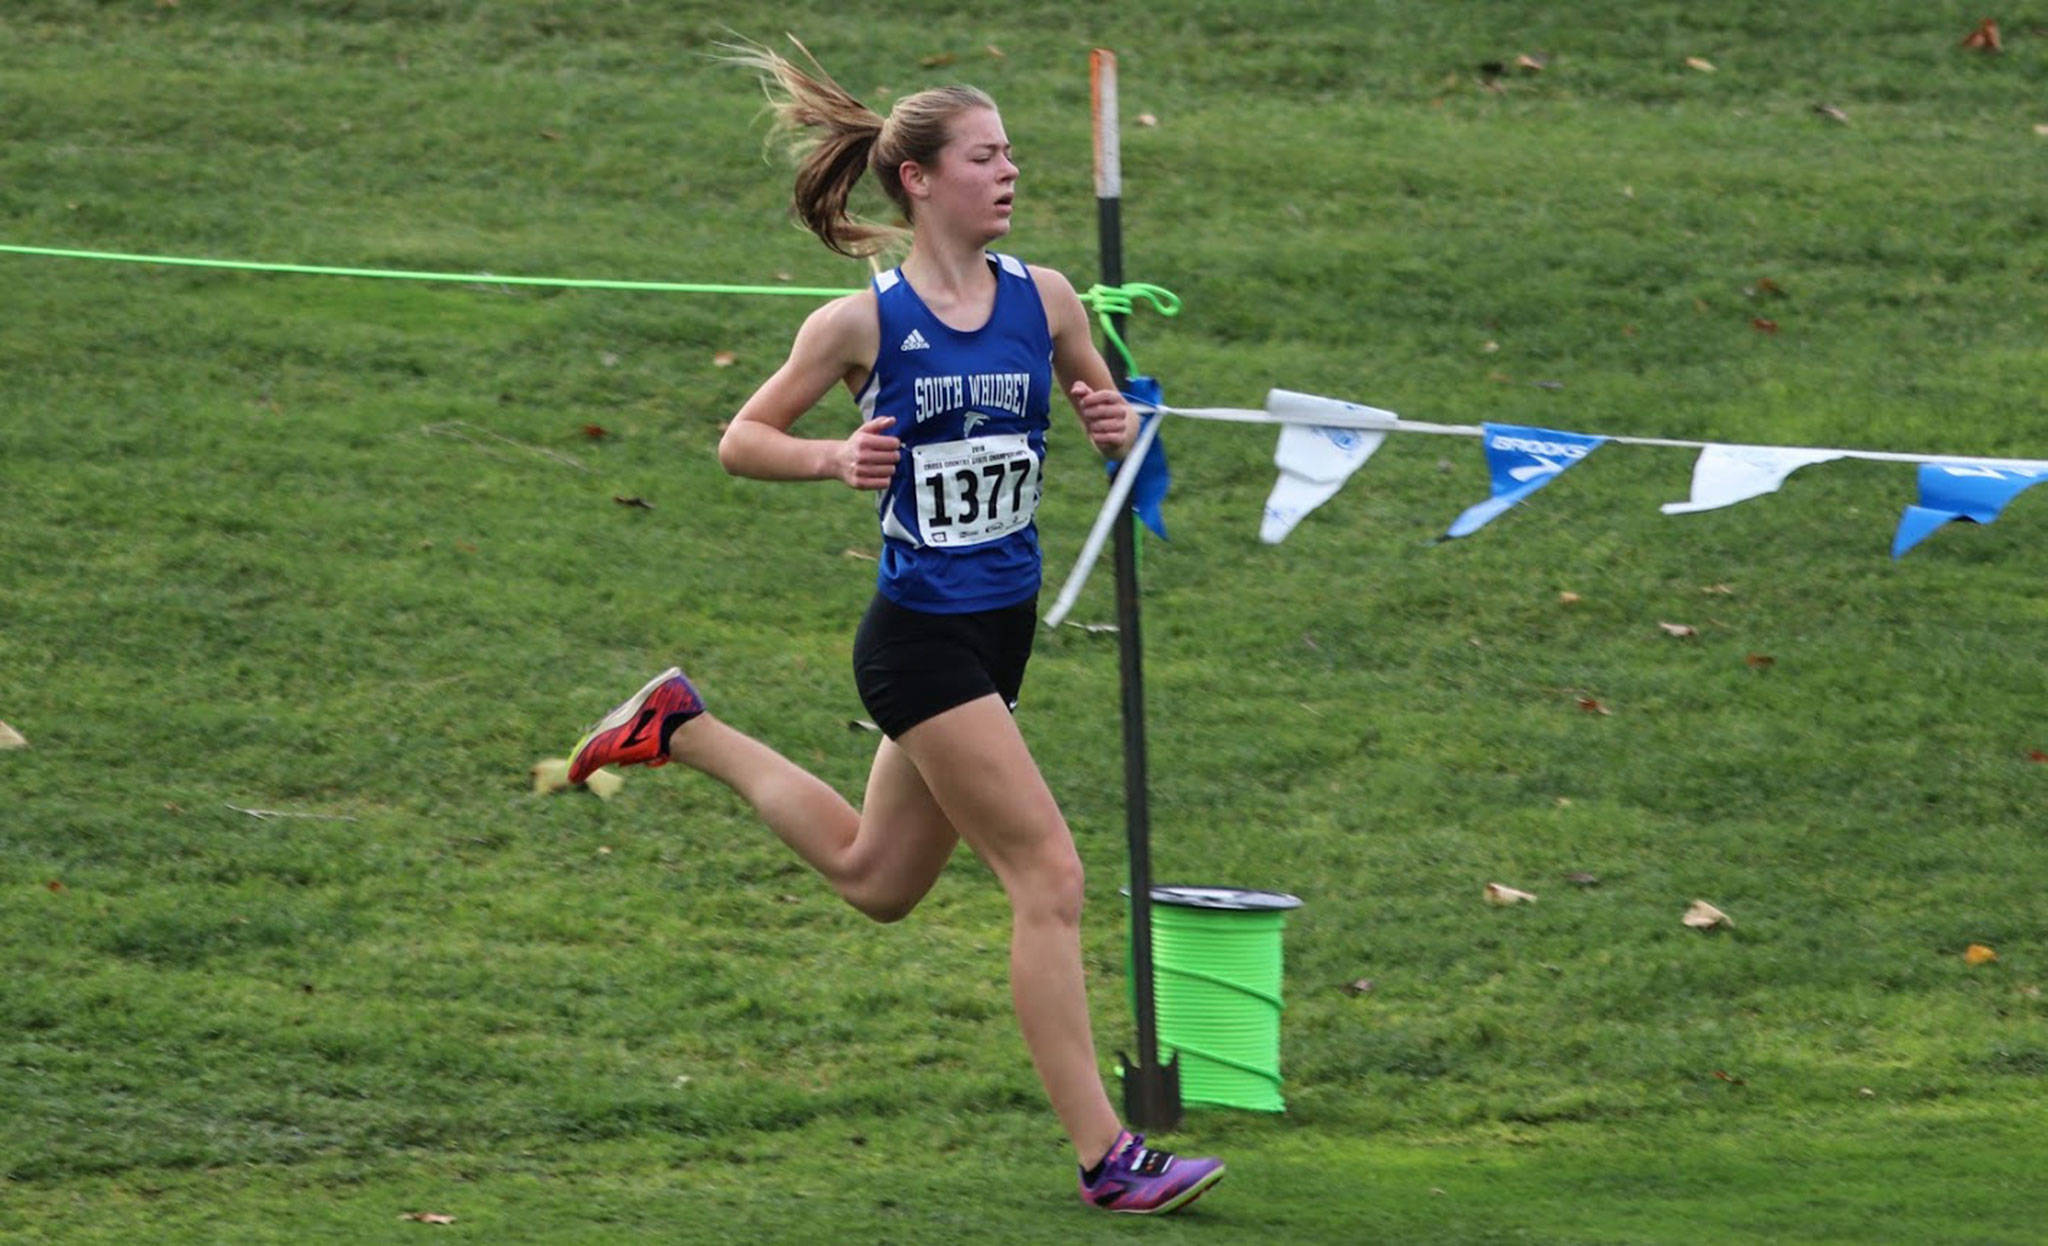 Kaia Swegler Richmond, shown here competing in the state meet, was named to the All-North Sound Conference first team in cross country. (Photo by Matt Simms)